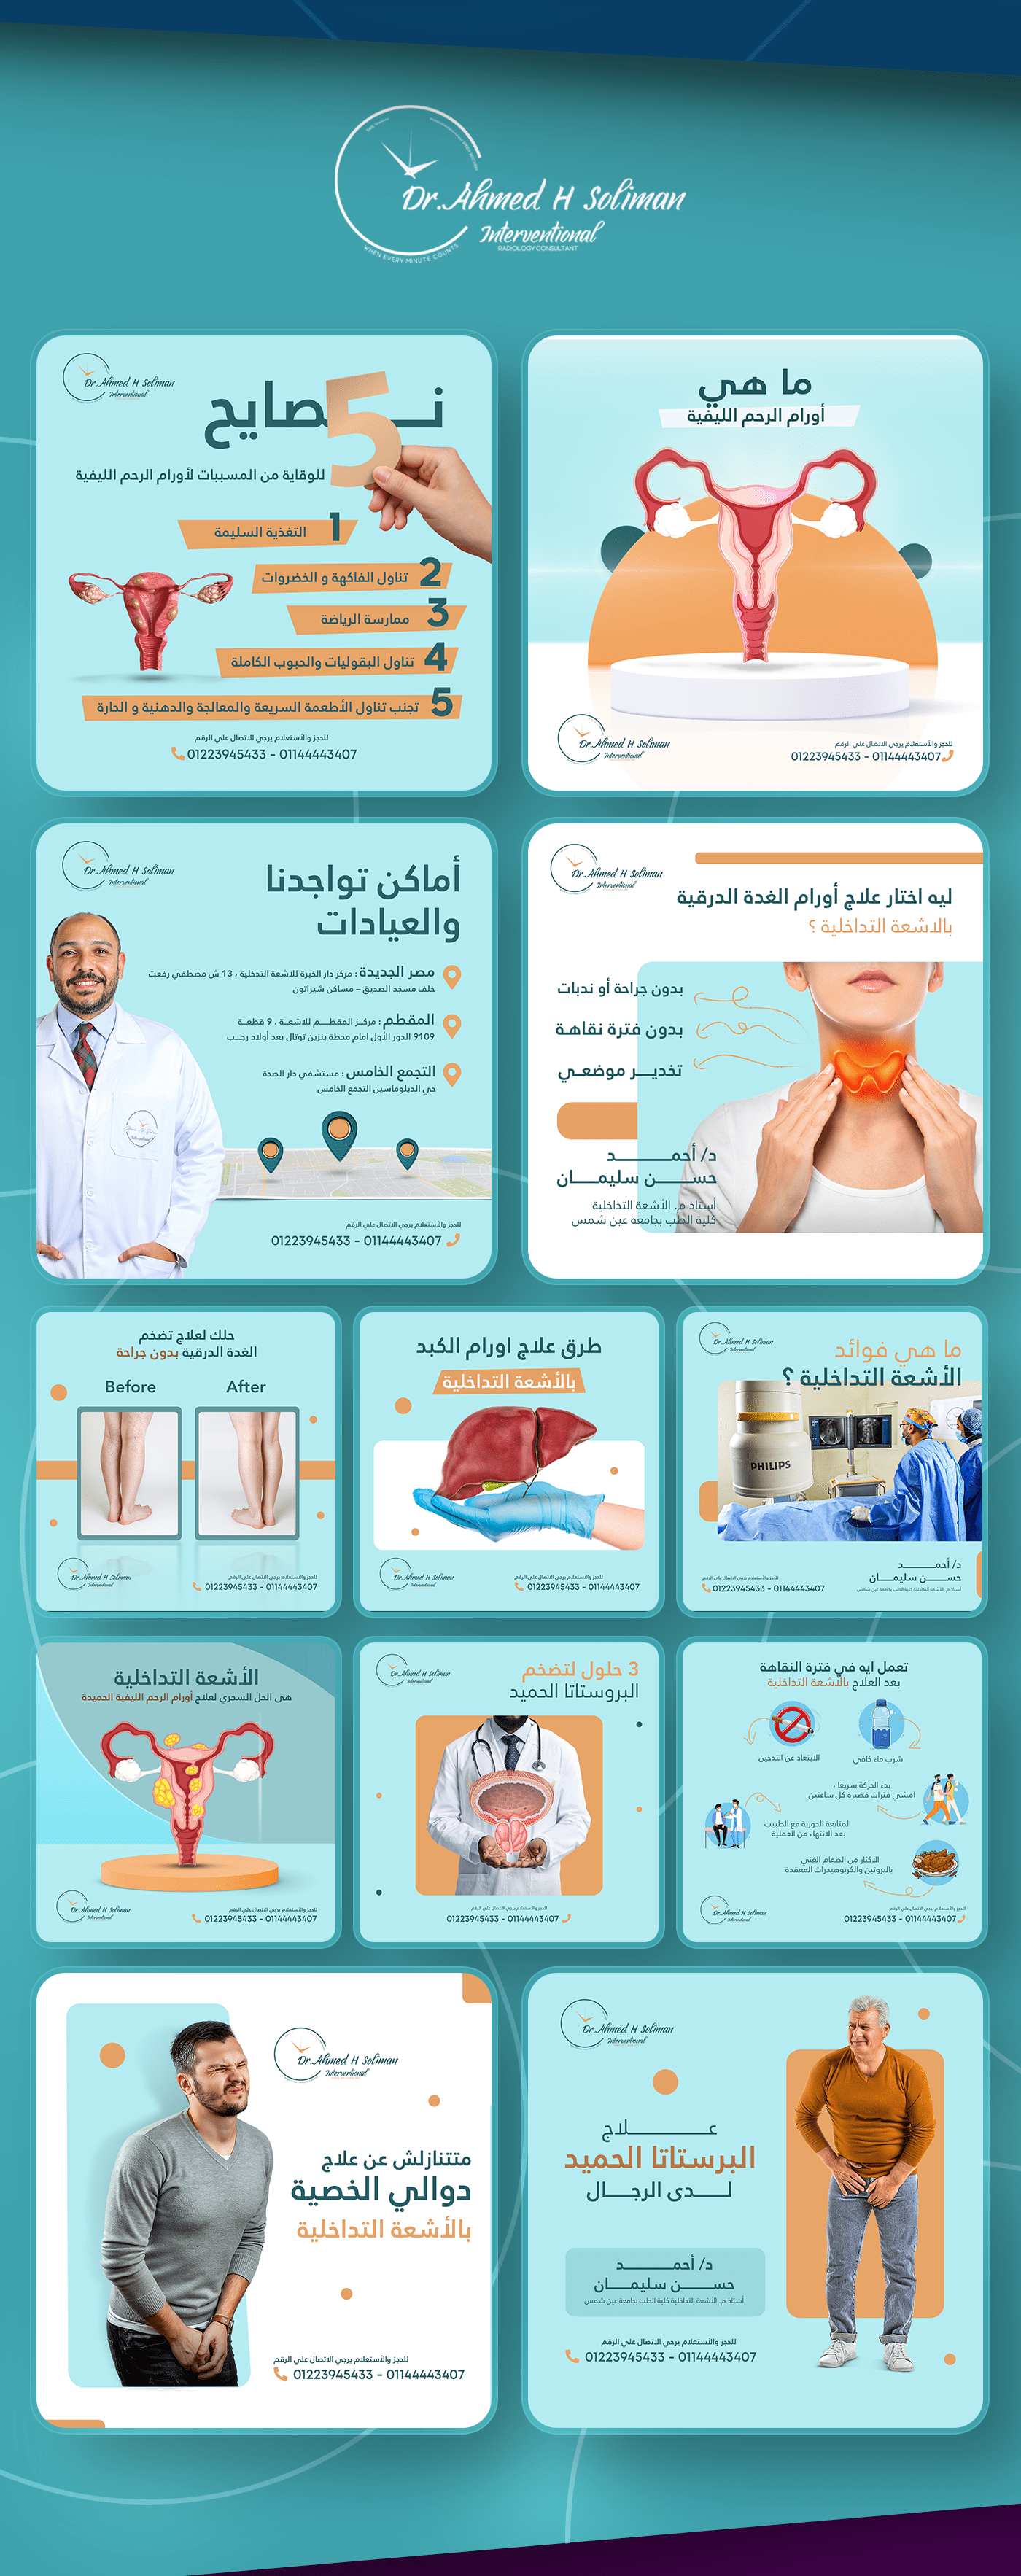 Social media designs for doctor ahmed soliman radiclogy consultant